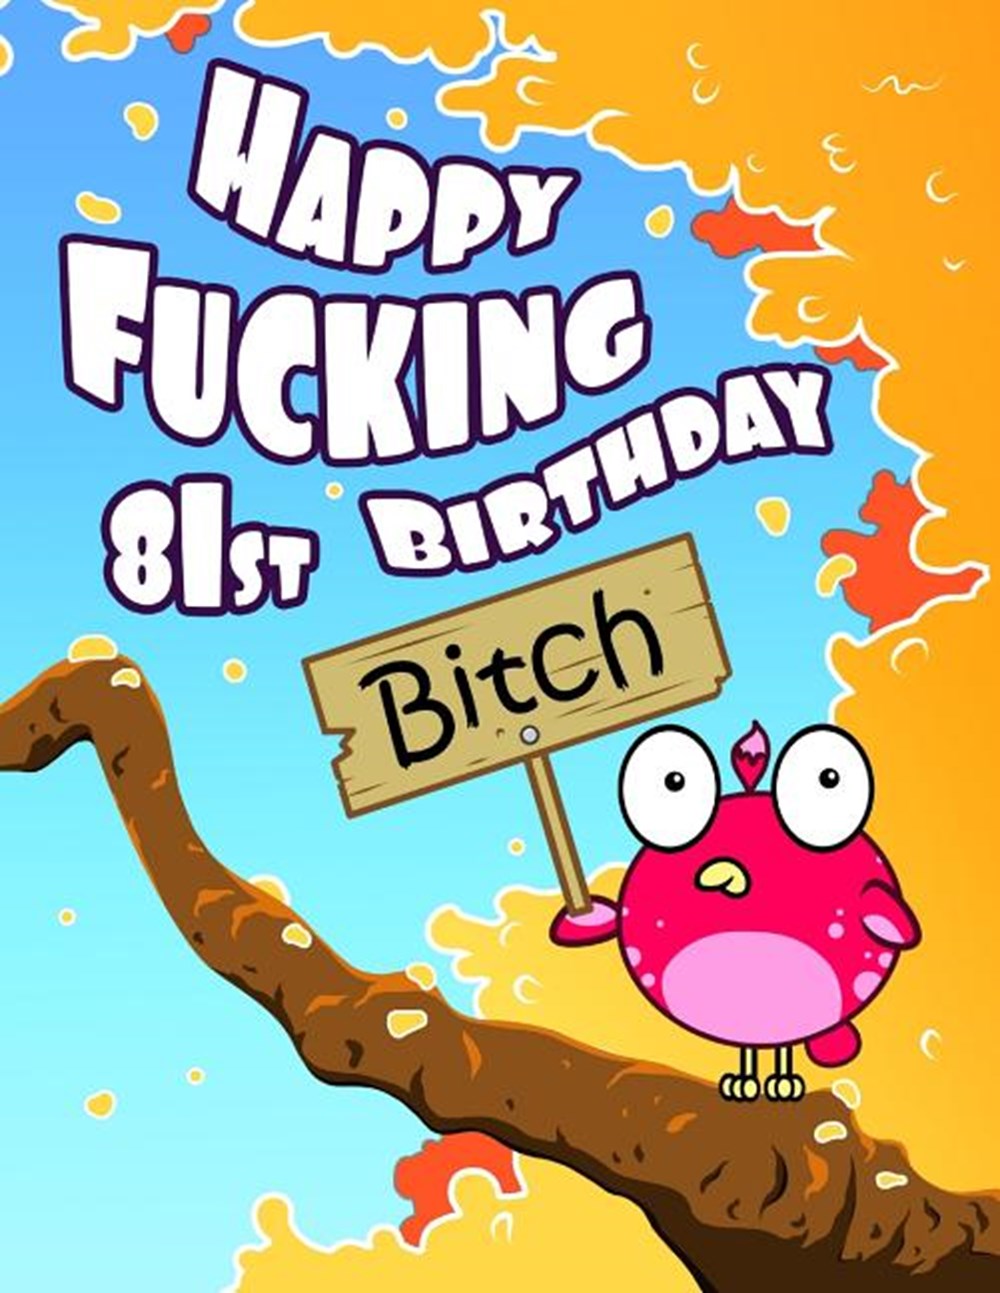 Happy Fucking 81st Birthday Bitch: Sweet Sprinkled with Sassy...Forget the Funny Birthday Card and G